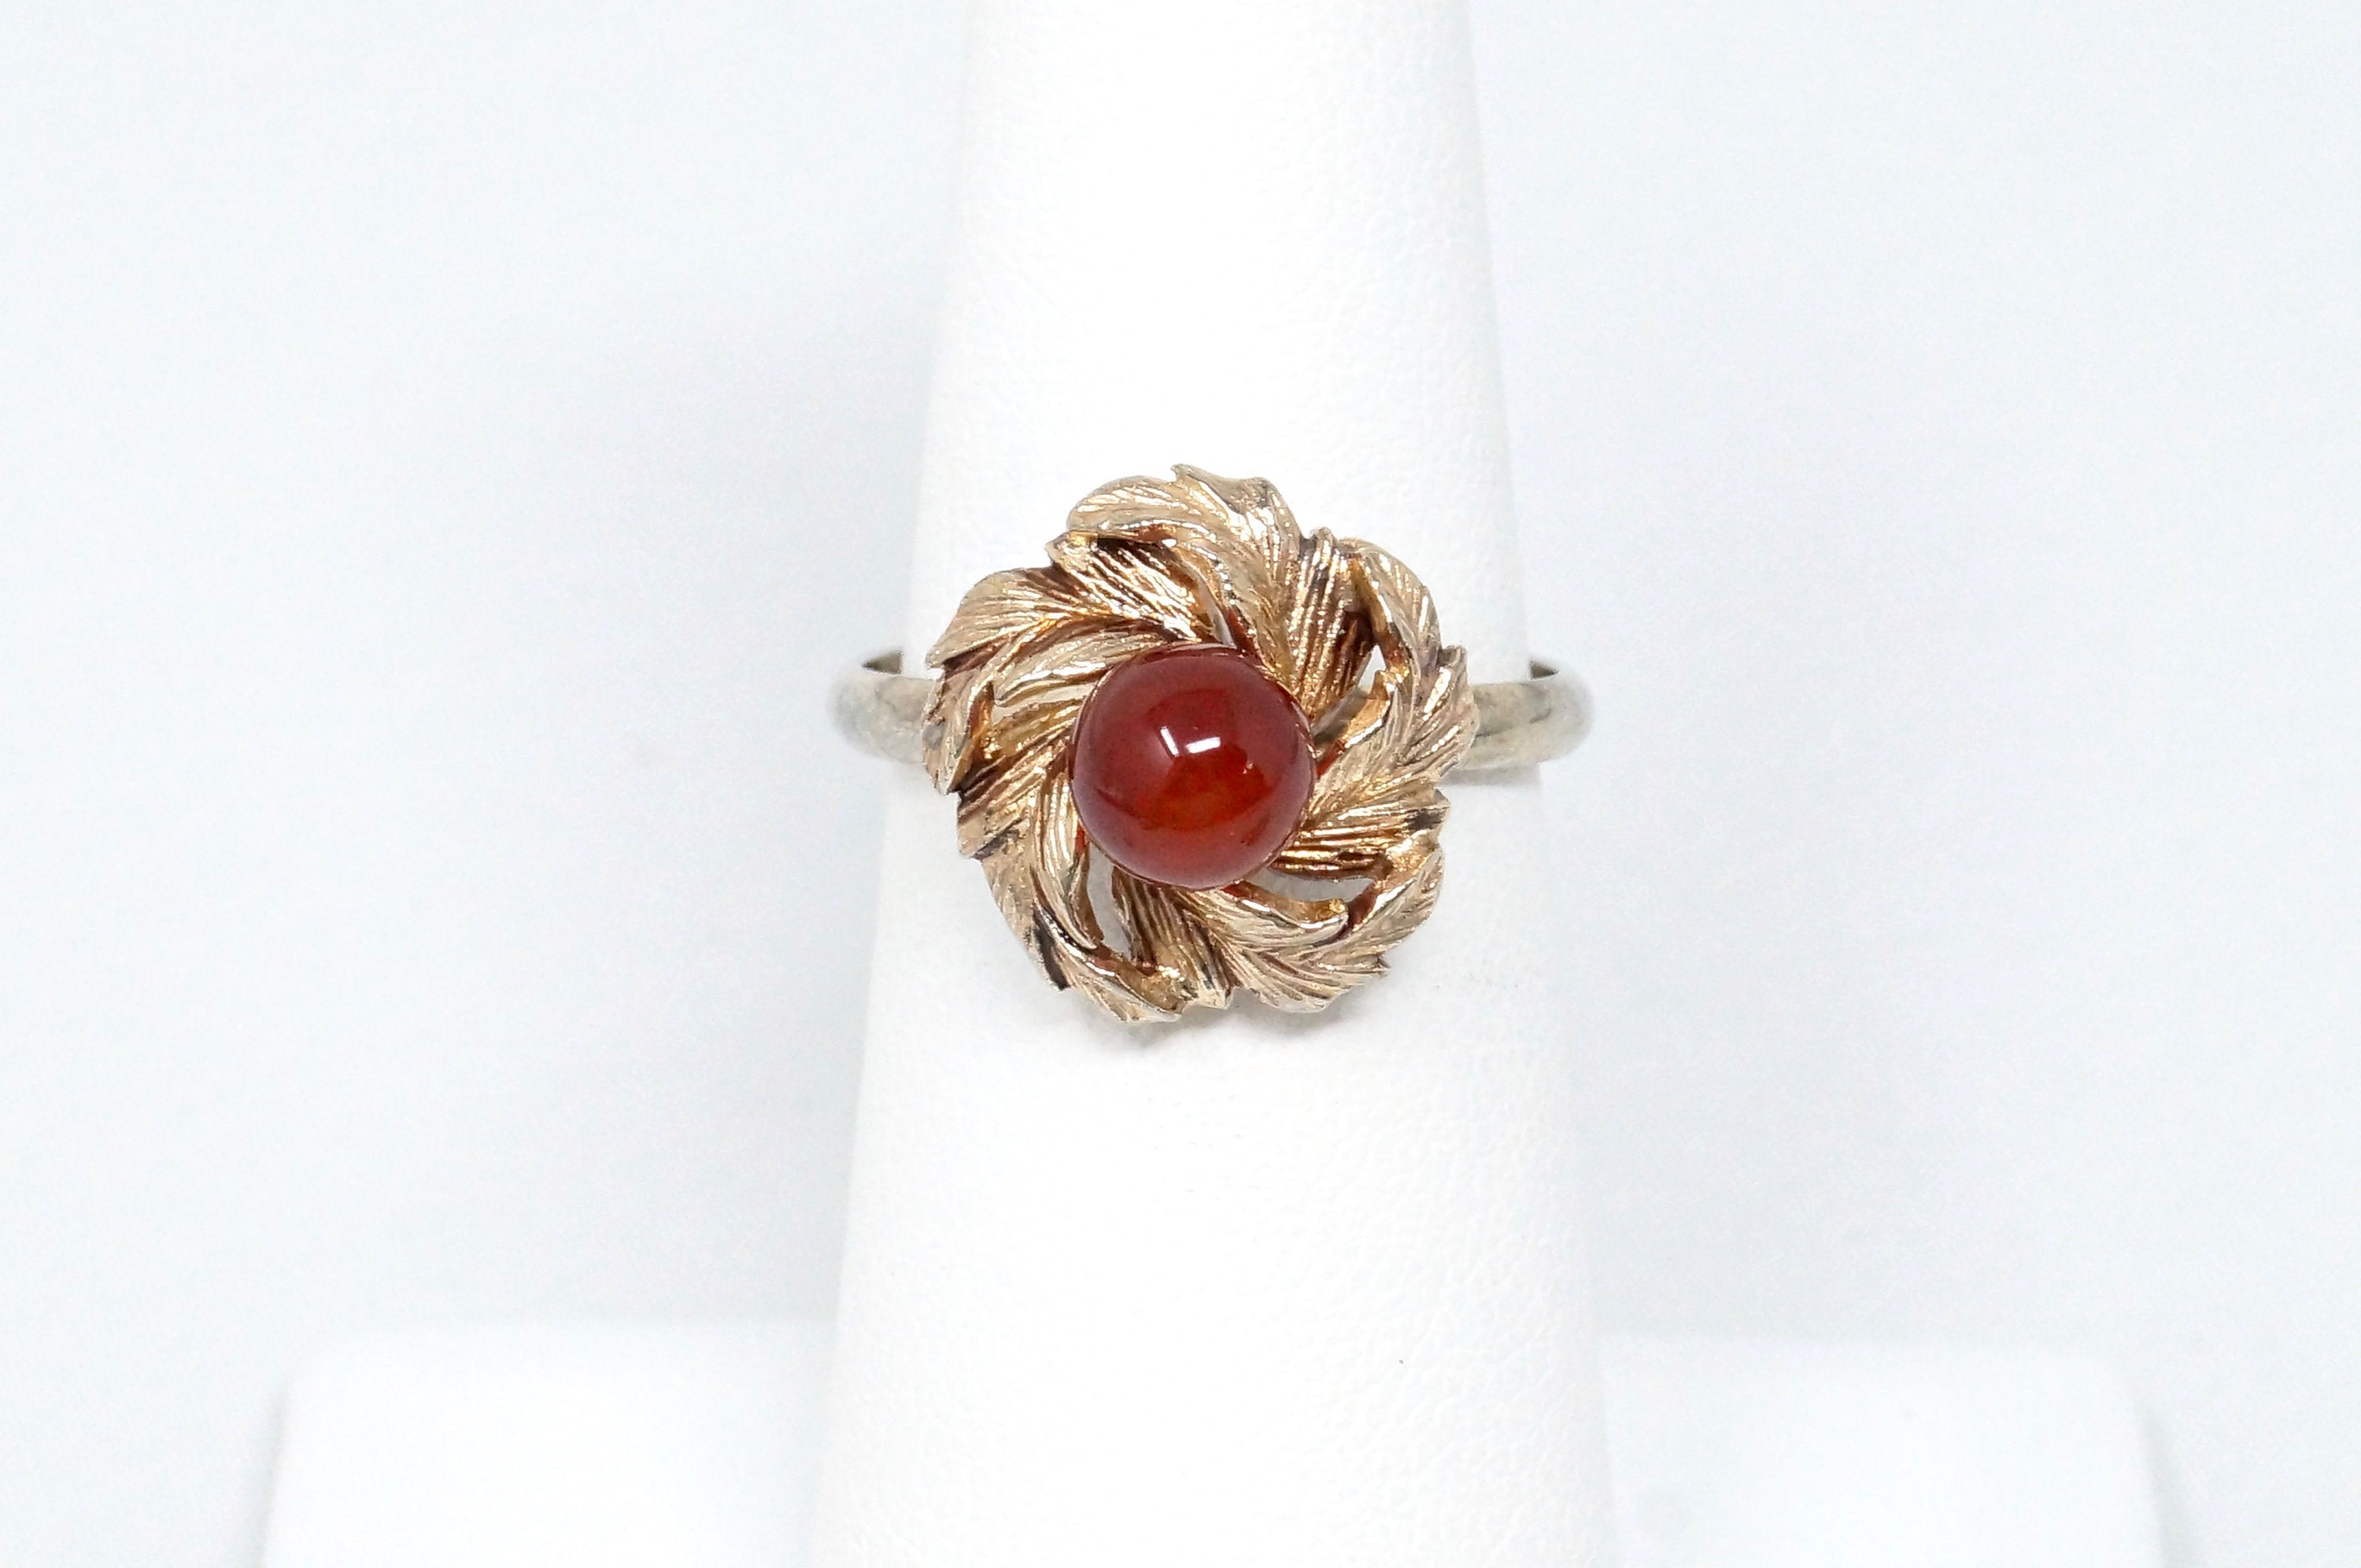 Vtg Early 1900s Style Carnelian Gold Flower Sterling Silver Adjustable Ring Sz 7